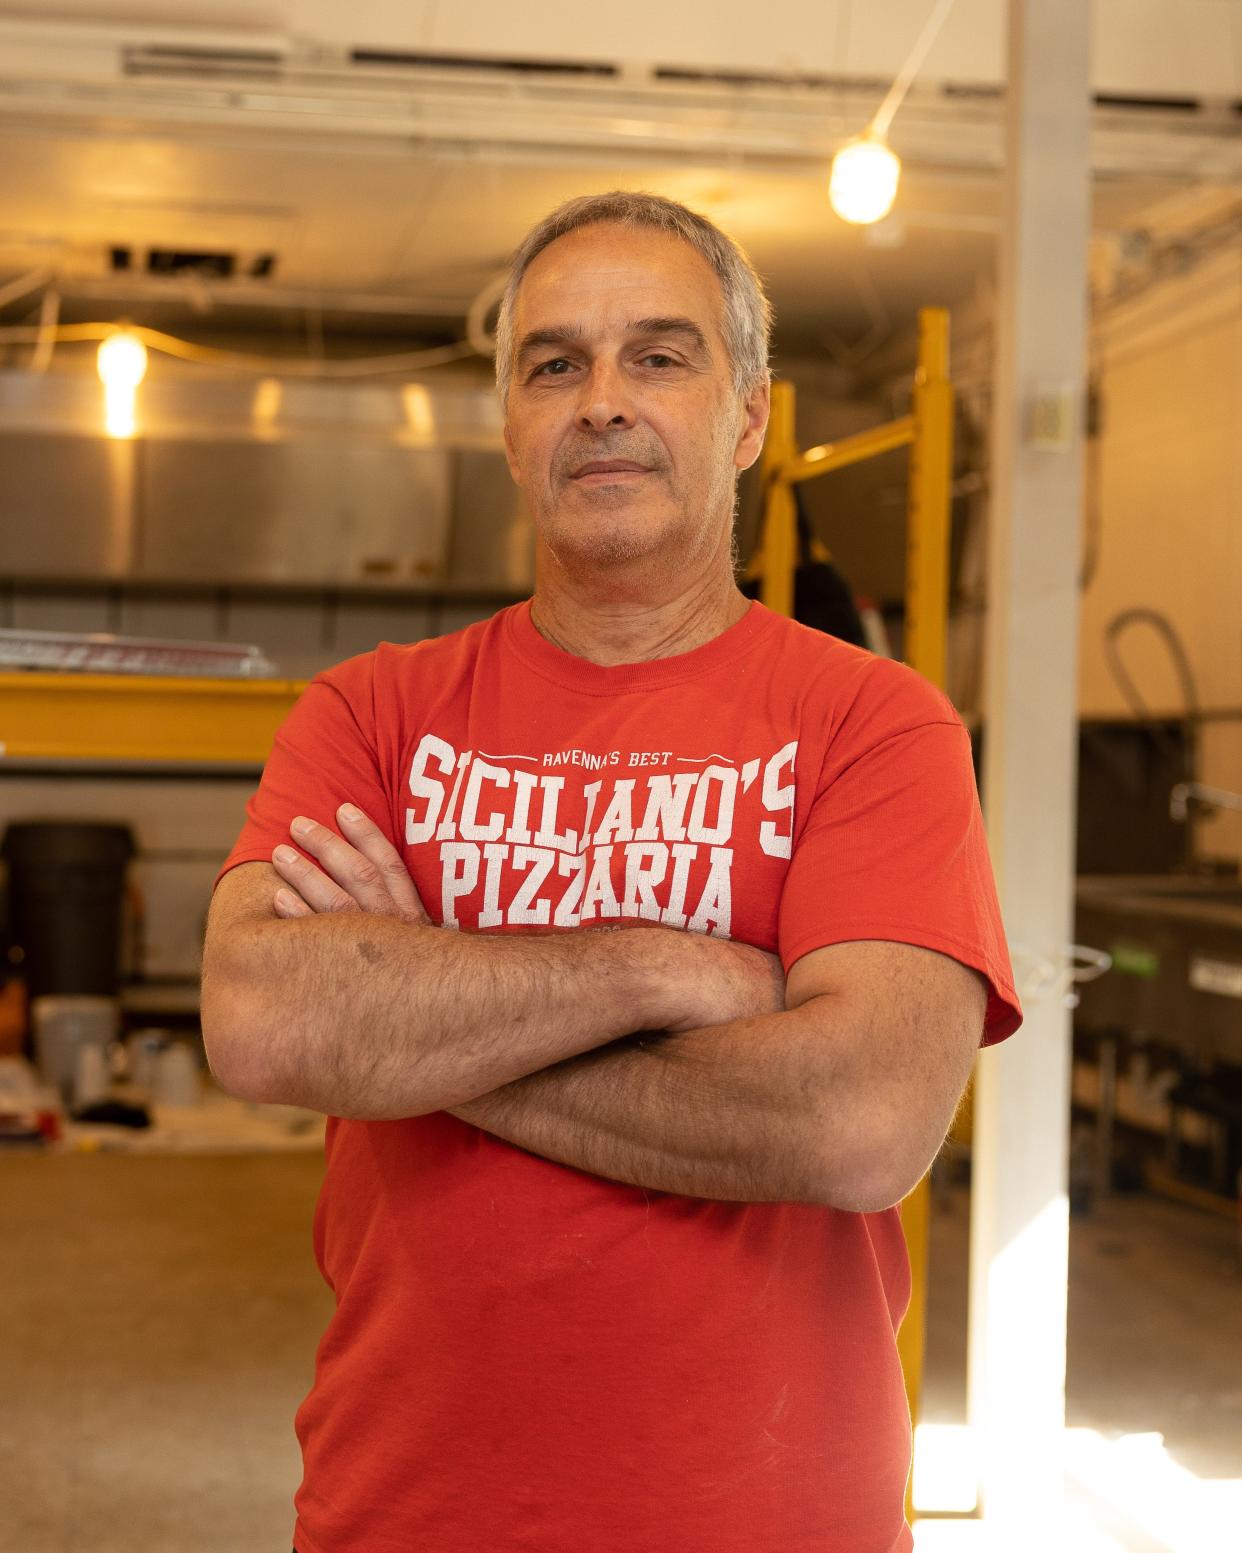 Tom Siciliano, owner of Siciliano’s Pizzaria in Ravenna, stands in the kitchen of his restaurant that sustained a fire back in early July.